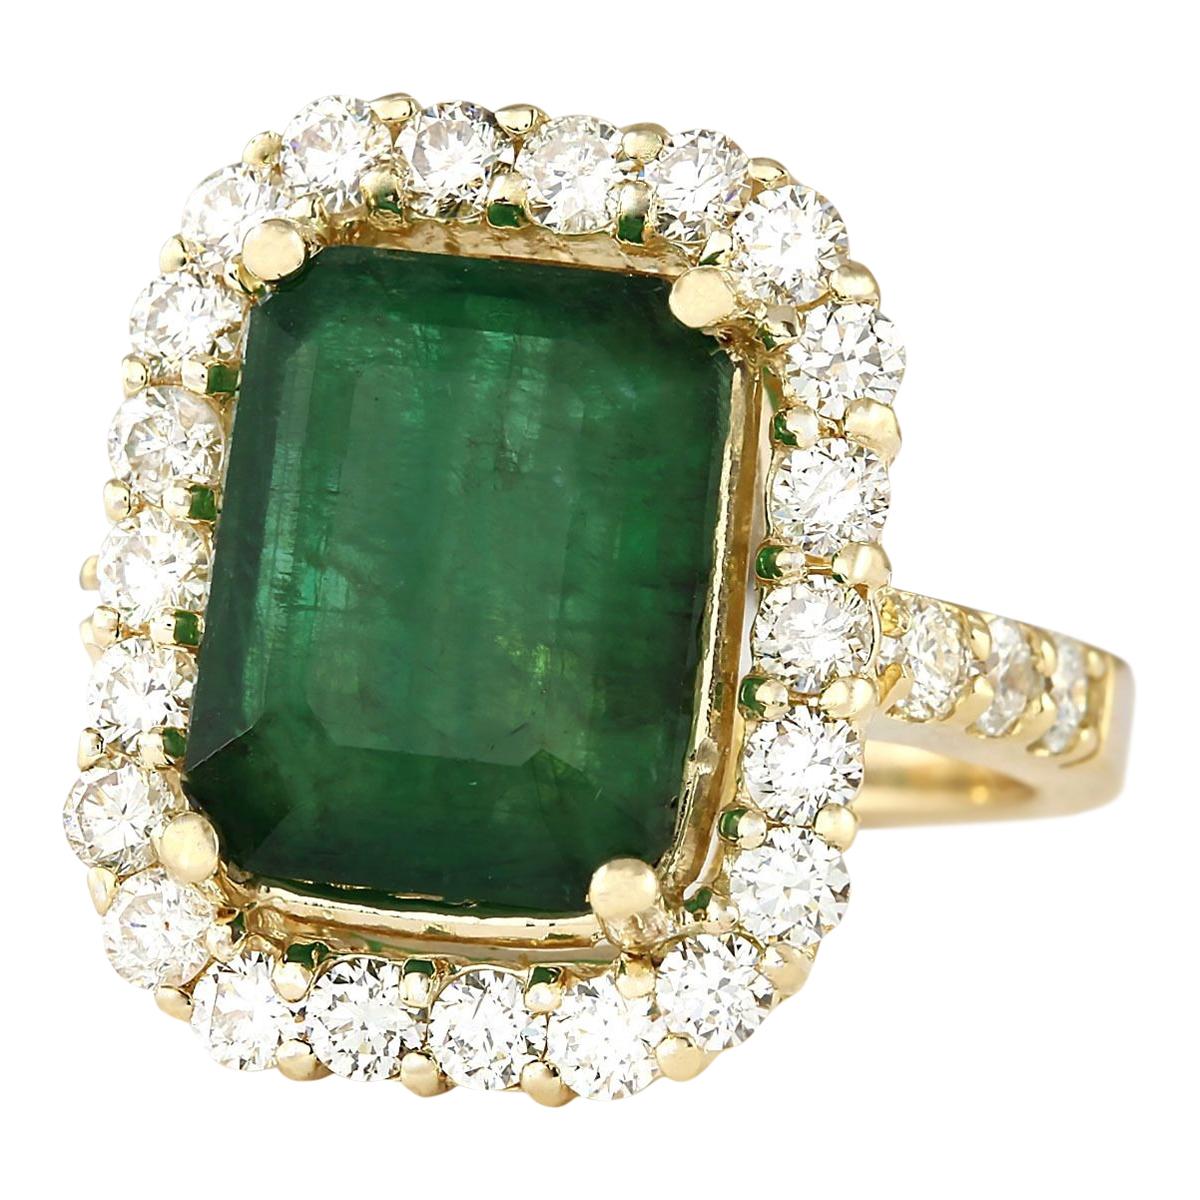 7.91 Carat Emerald 14 Karat Yellow Gold Diamond Ring
Stamped: 14K Yellow Gold
Total Ring Weight: 10.7 Grams
Emerald Weight is 6.30 Carat (Measures: 12.00x10.00 mm)
Color: Green
Diamond Weight is 1.61 Carat
Color: F-G, Clarity: VS2-SI1
Face Measures: